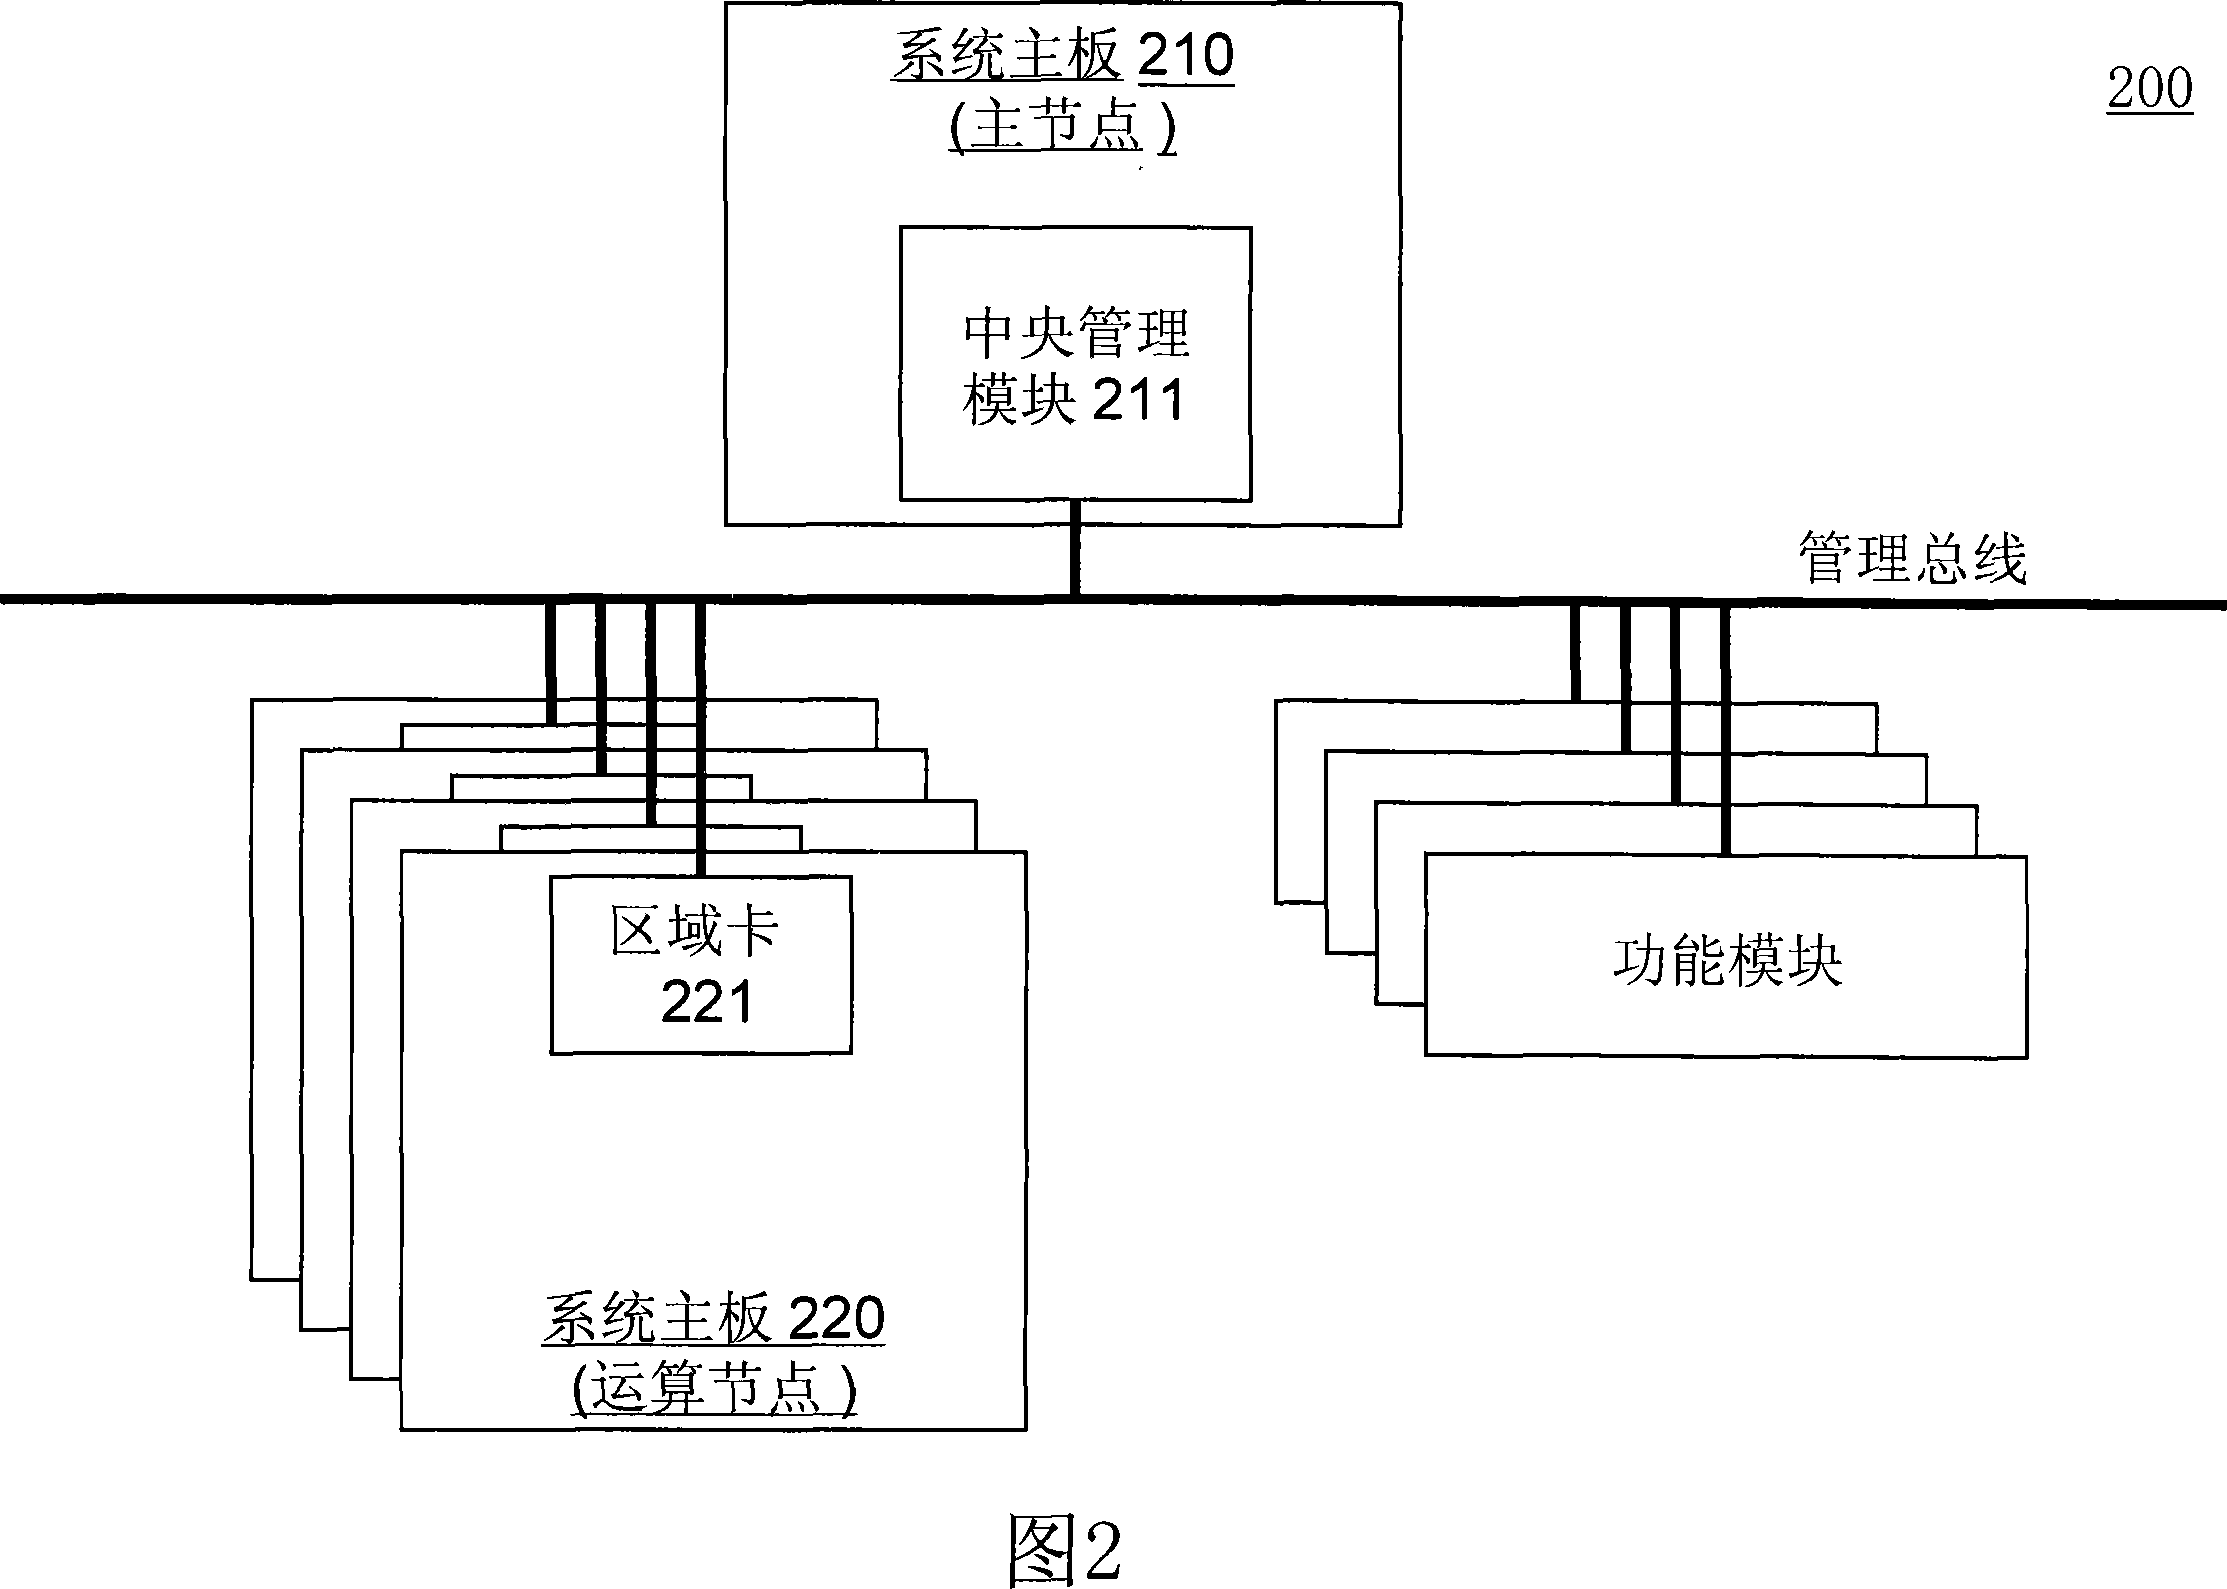 System management configuration of multiple main board system